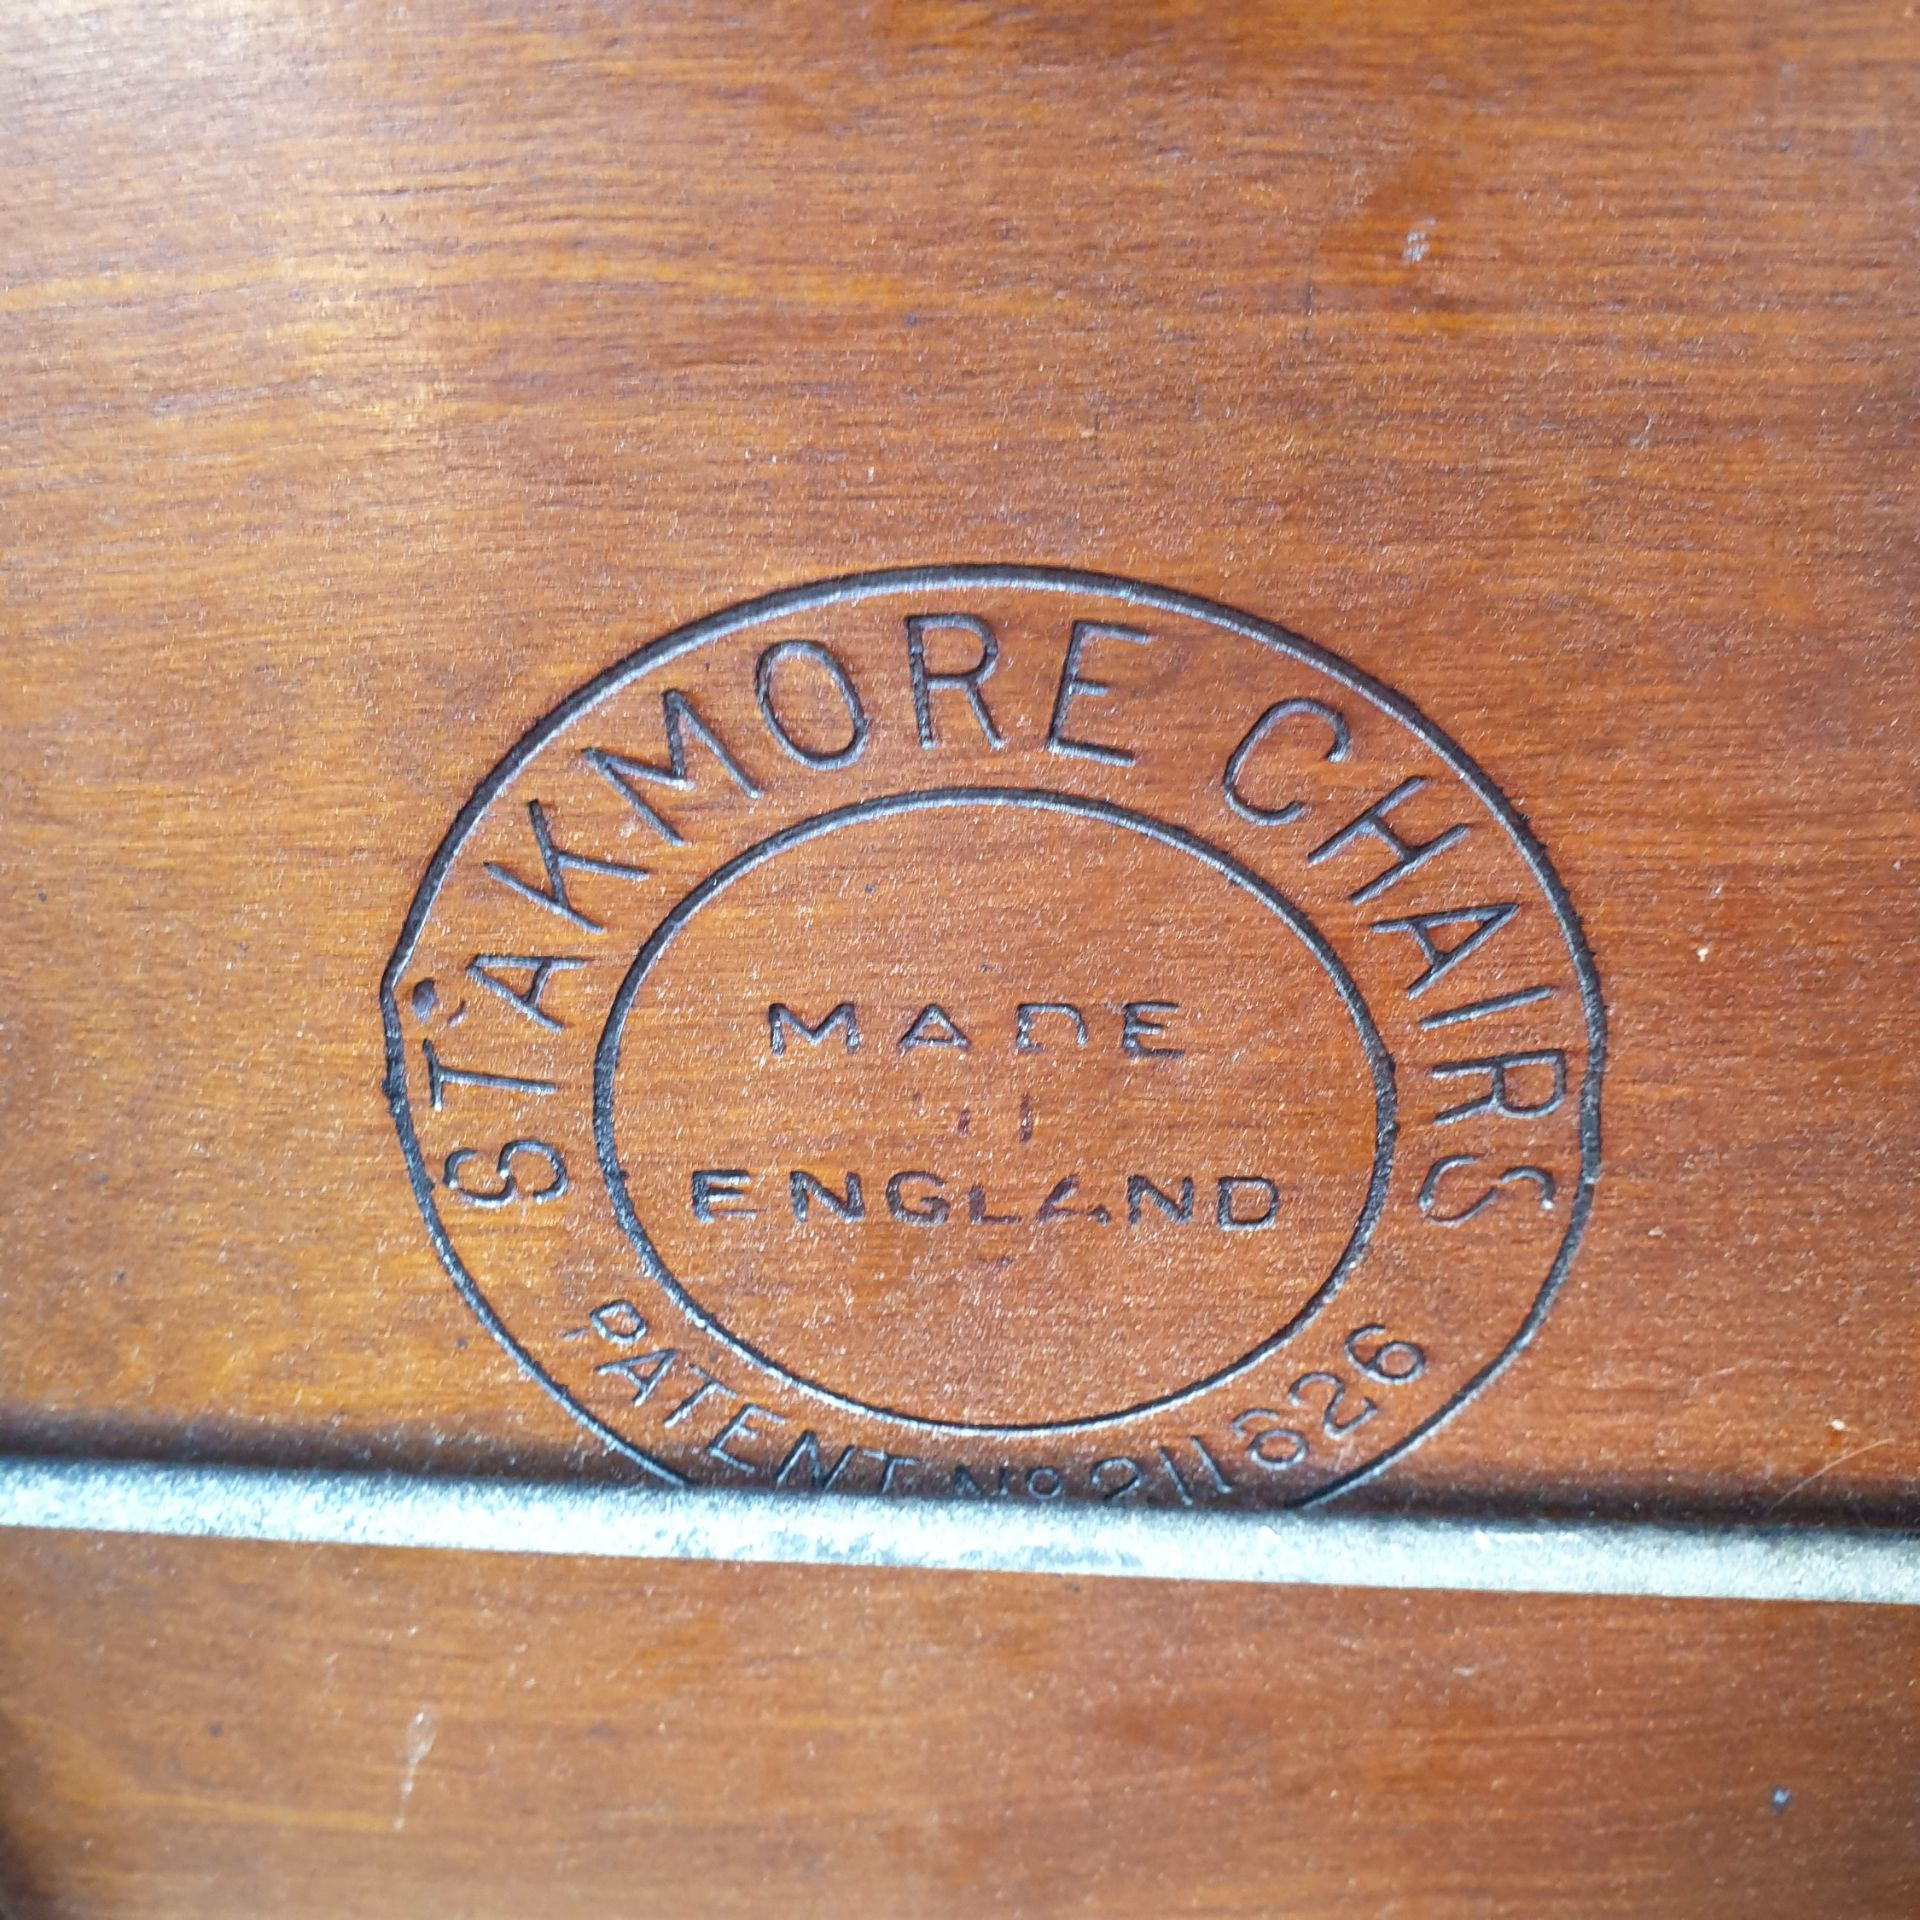 Antique Stakmore Folding Chair - Image 2 of 3